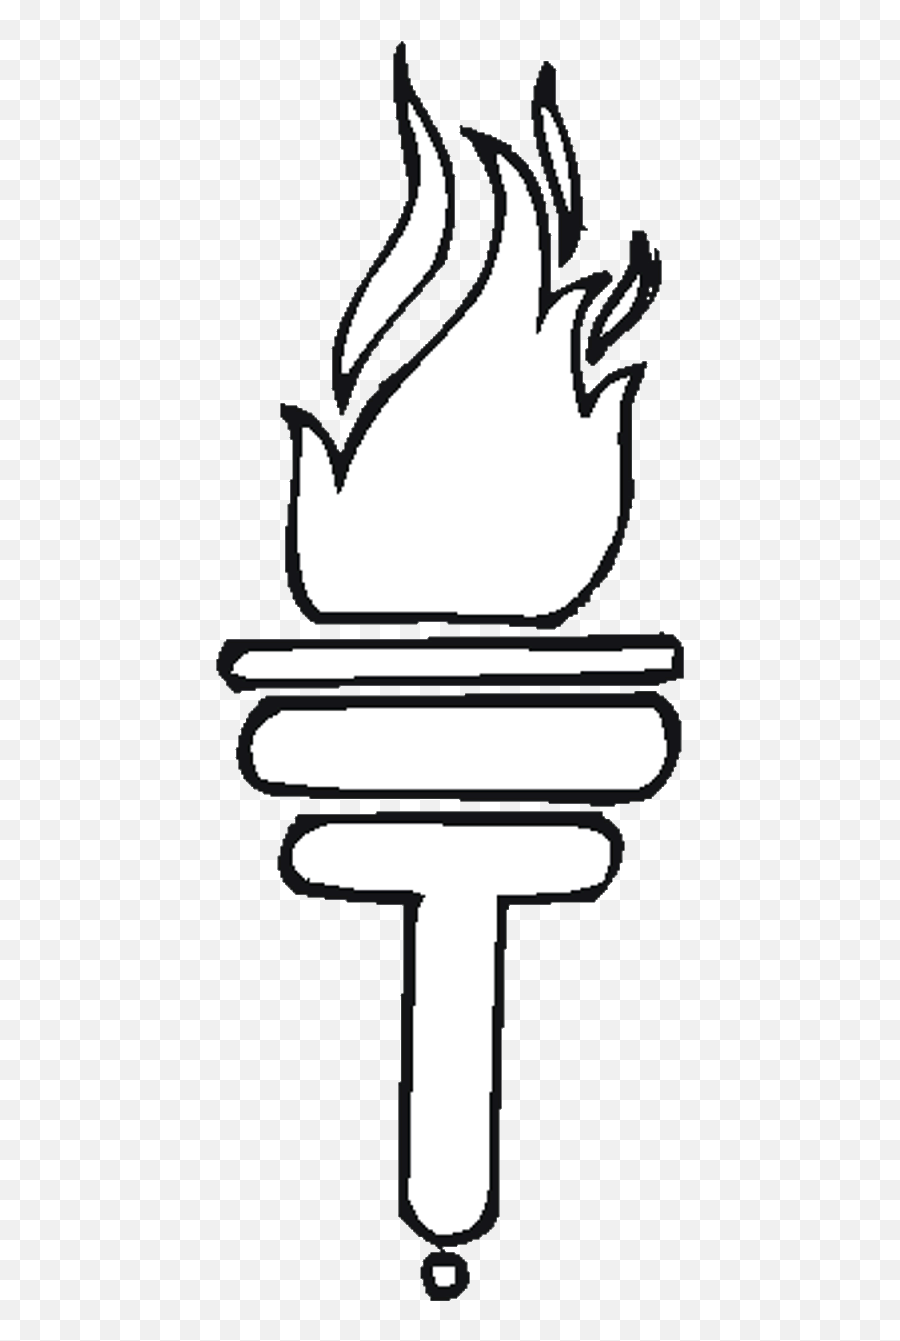 Olympic Coloring Pages - Olympic Torch Coloring Page Emoji,Coloring Pages About Emotions